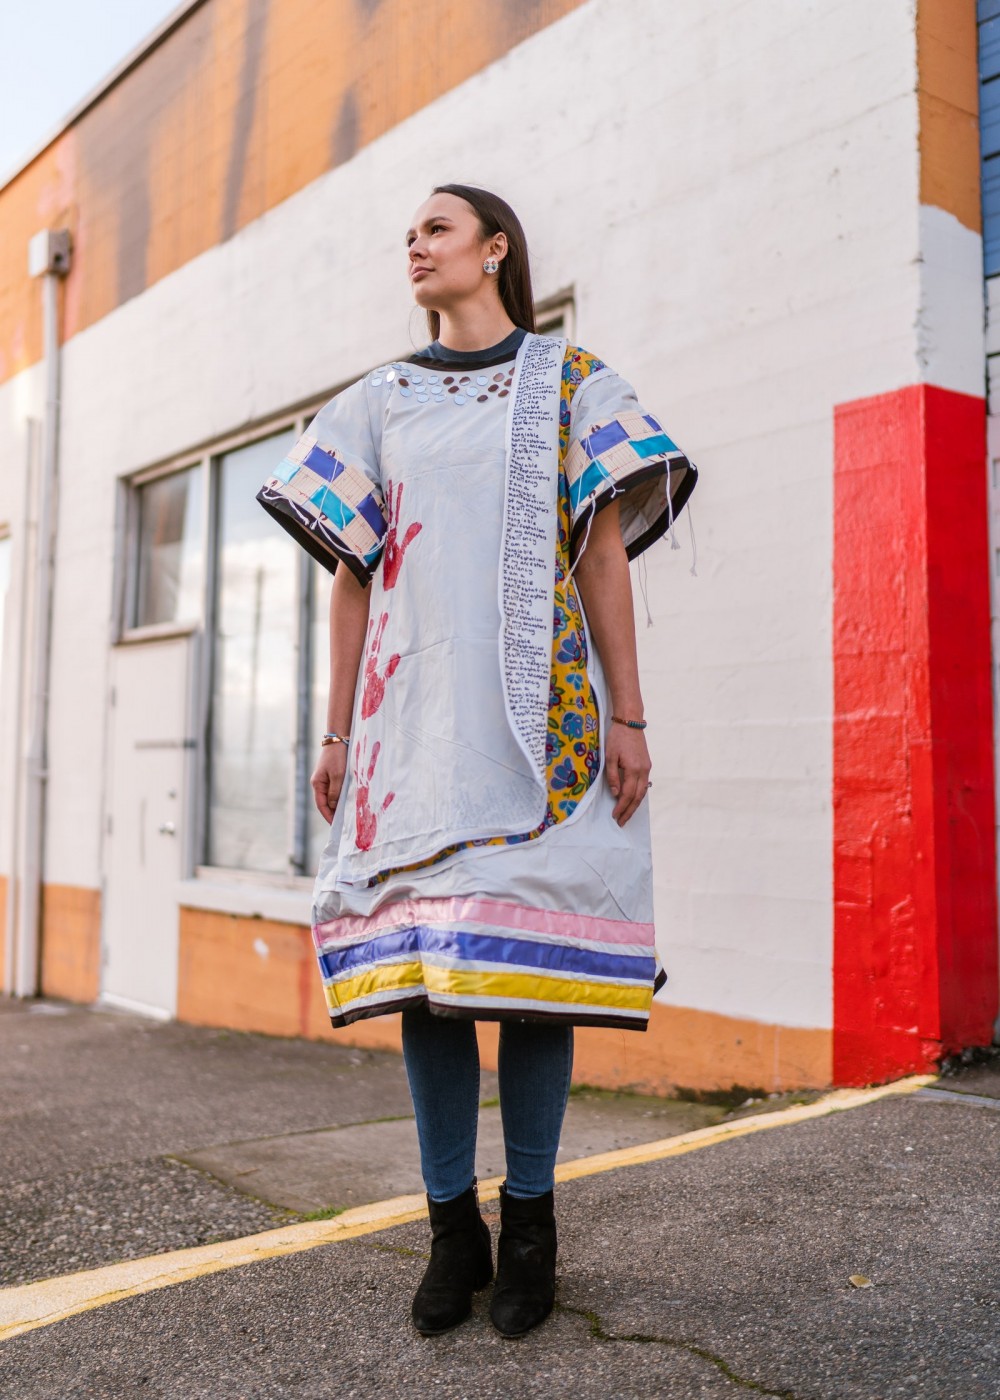 EchoHawk's dress worn by one of the staff members of the Urban Indian Health Institute.